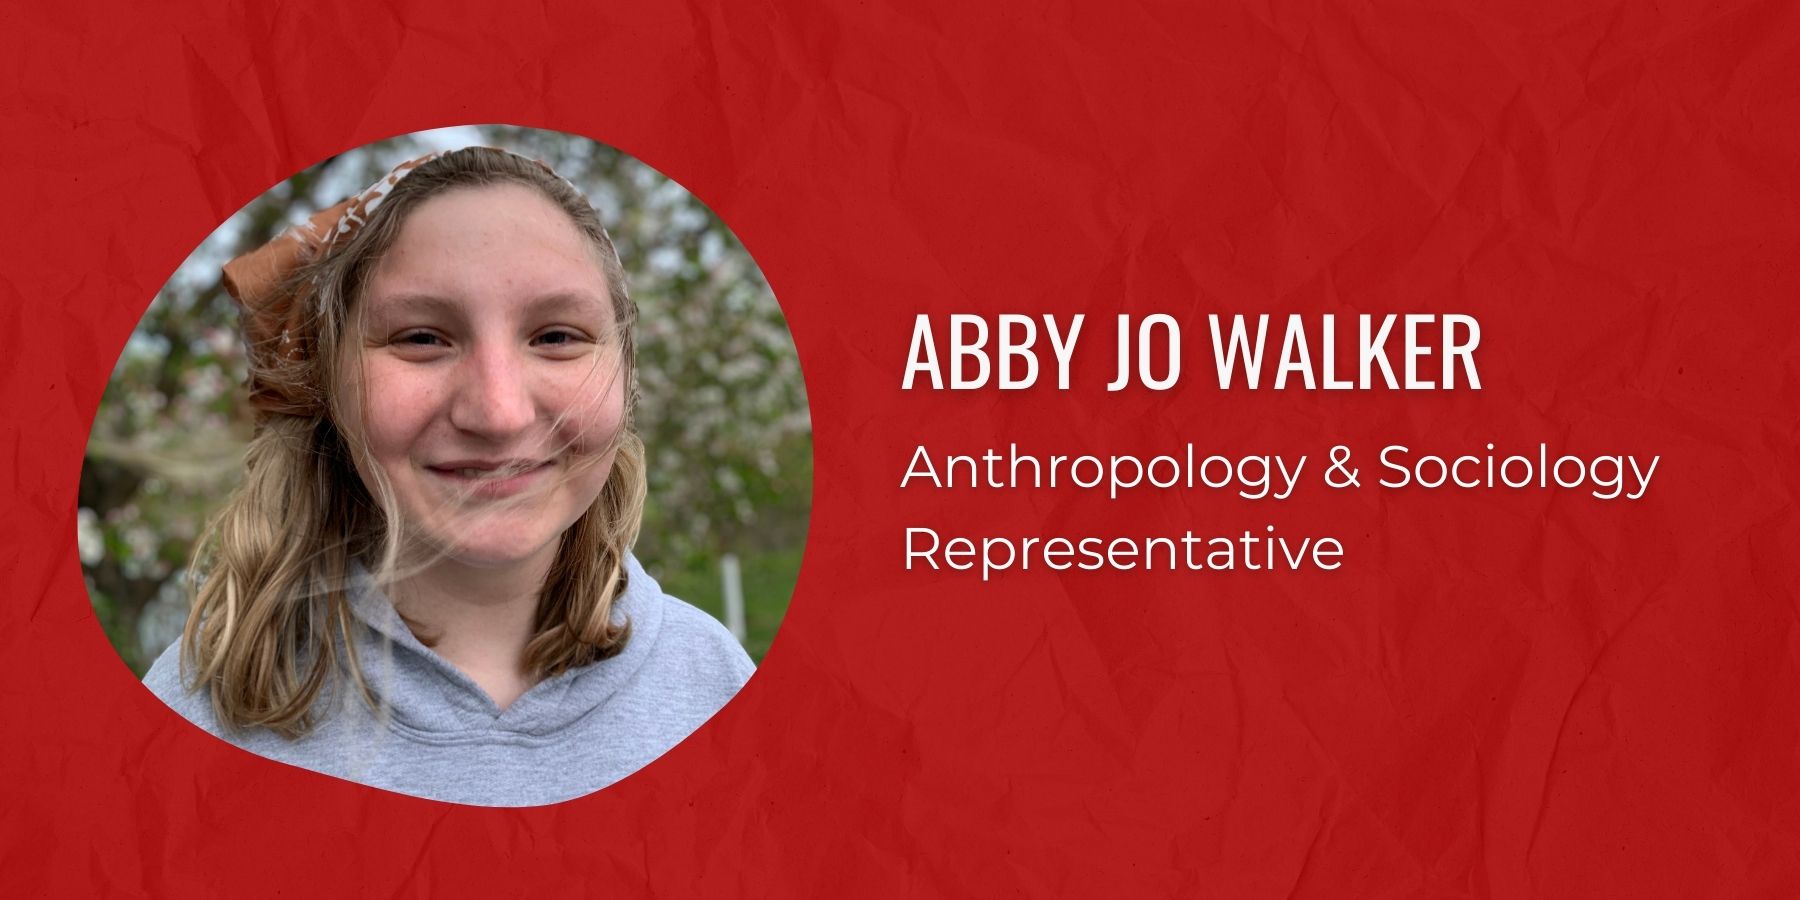 Photo of Abby Jo Walker and text: Anthropology & Sociology Representative